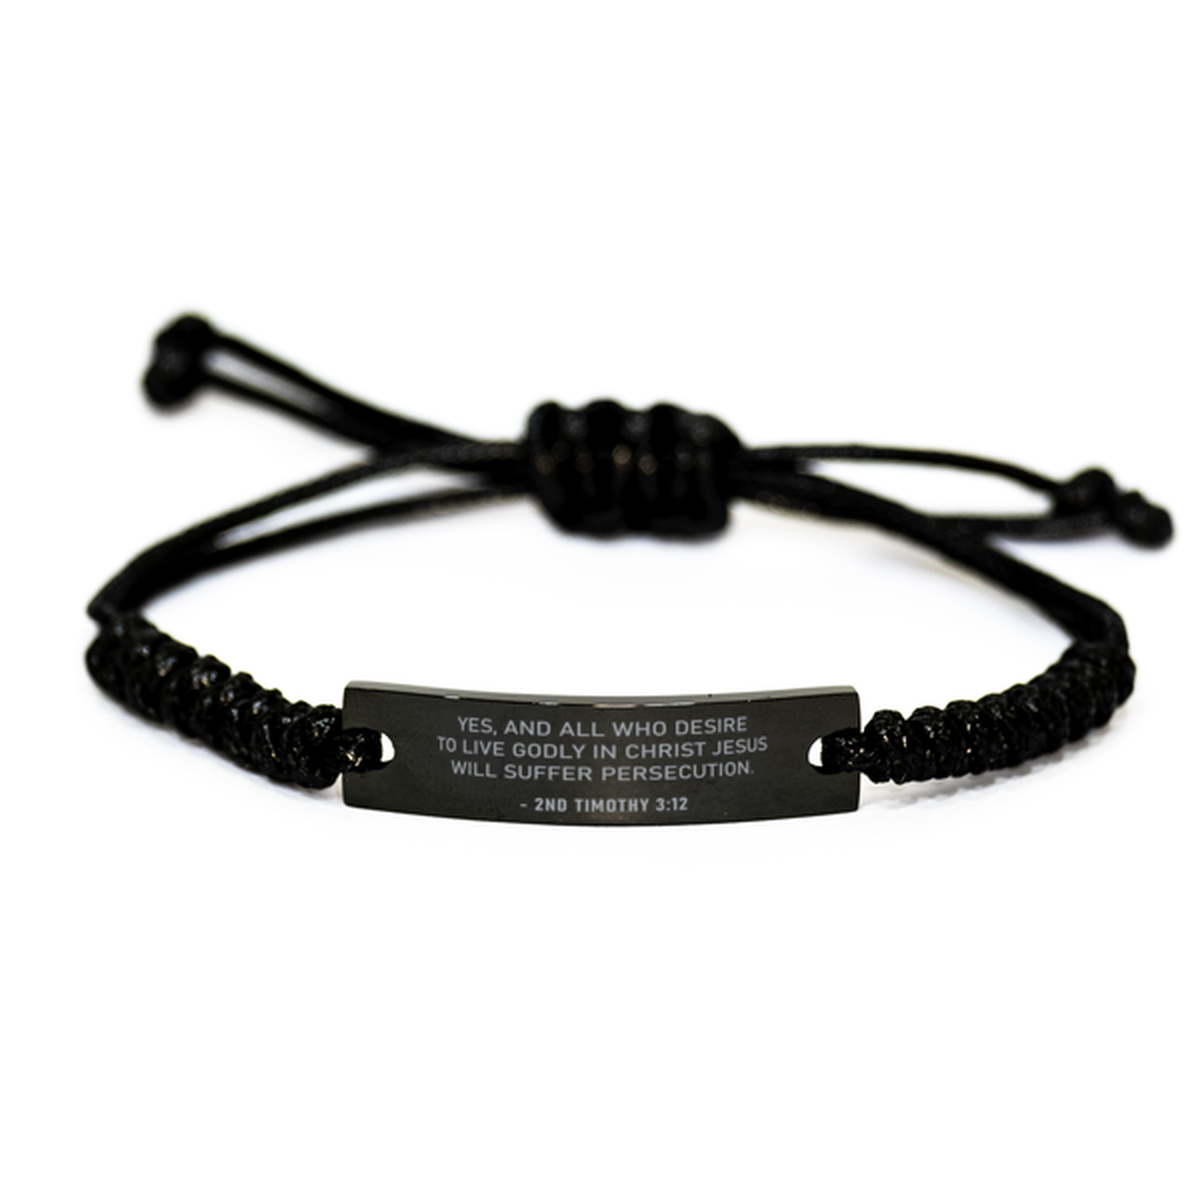 Bible Verse Rope Bracelet, 2Nd Timothy 3:12 Yes, And All Who Desire To Live Godly In, Christian Encouraging Gifts For Men Women Boys Girls